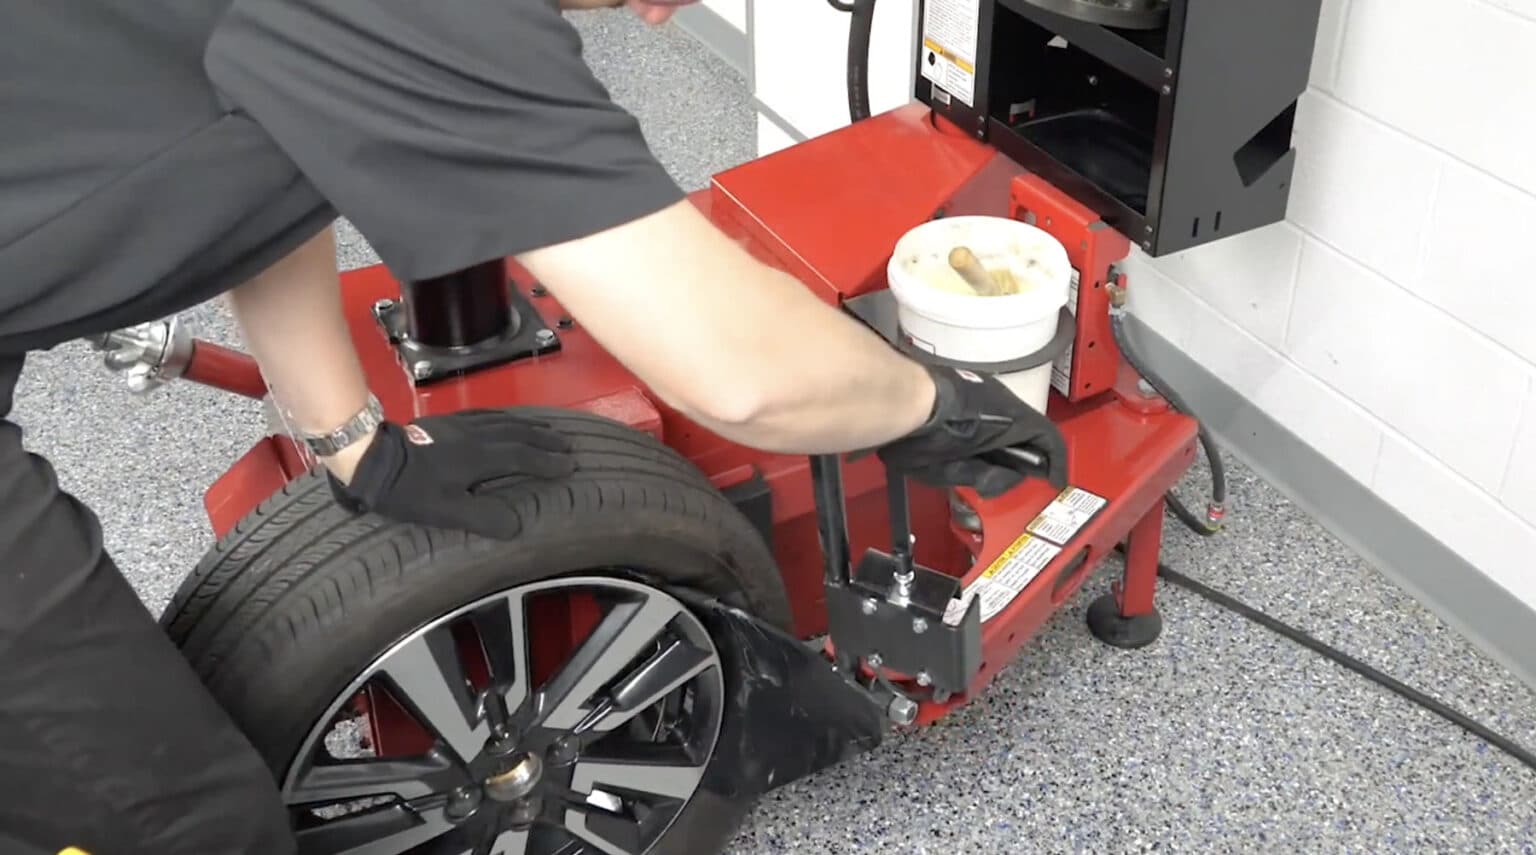 A technician uses his right hand to guide the bead loosener shovel between the wheel and the tire while his left hand holds the upright tire in place.